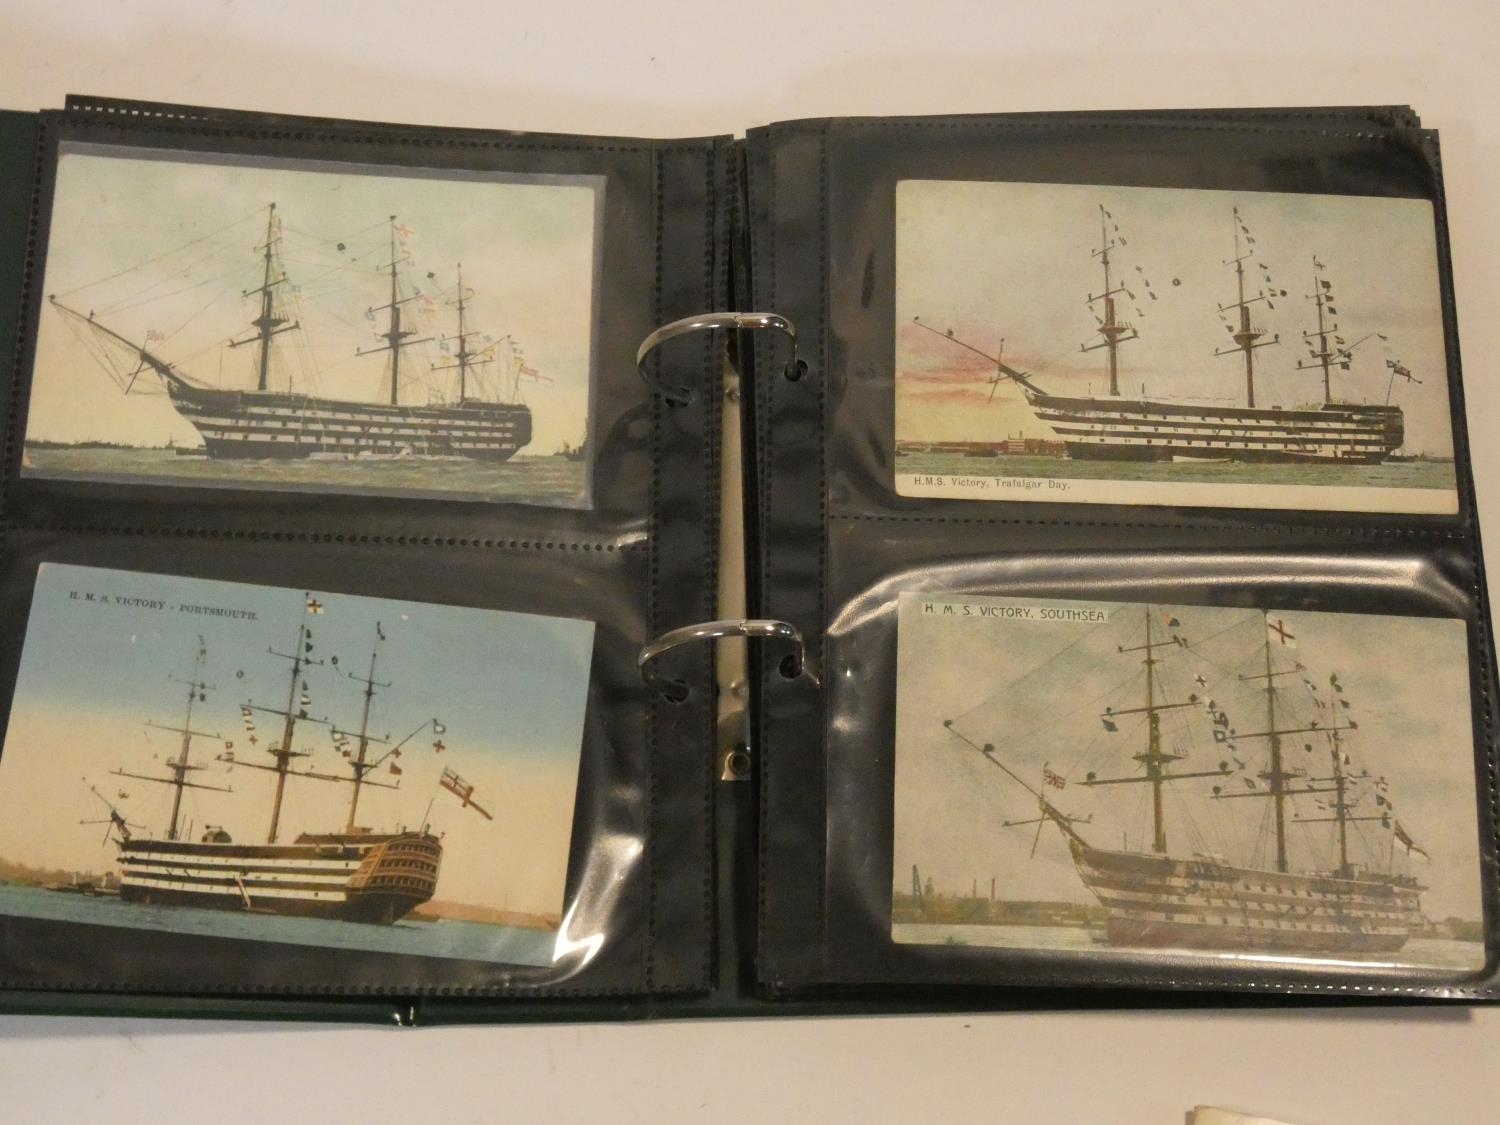 Two albums of antique and vintage postcards, stamps and cigarette cards related to Napoleon and - Image 8 of 12